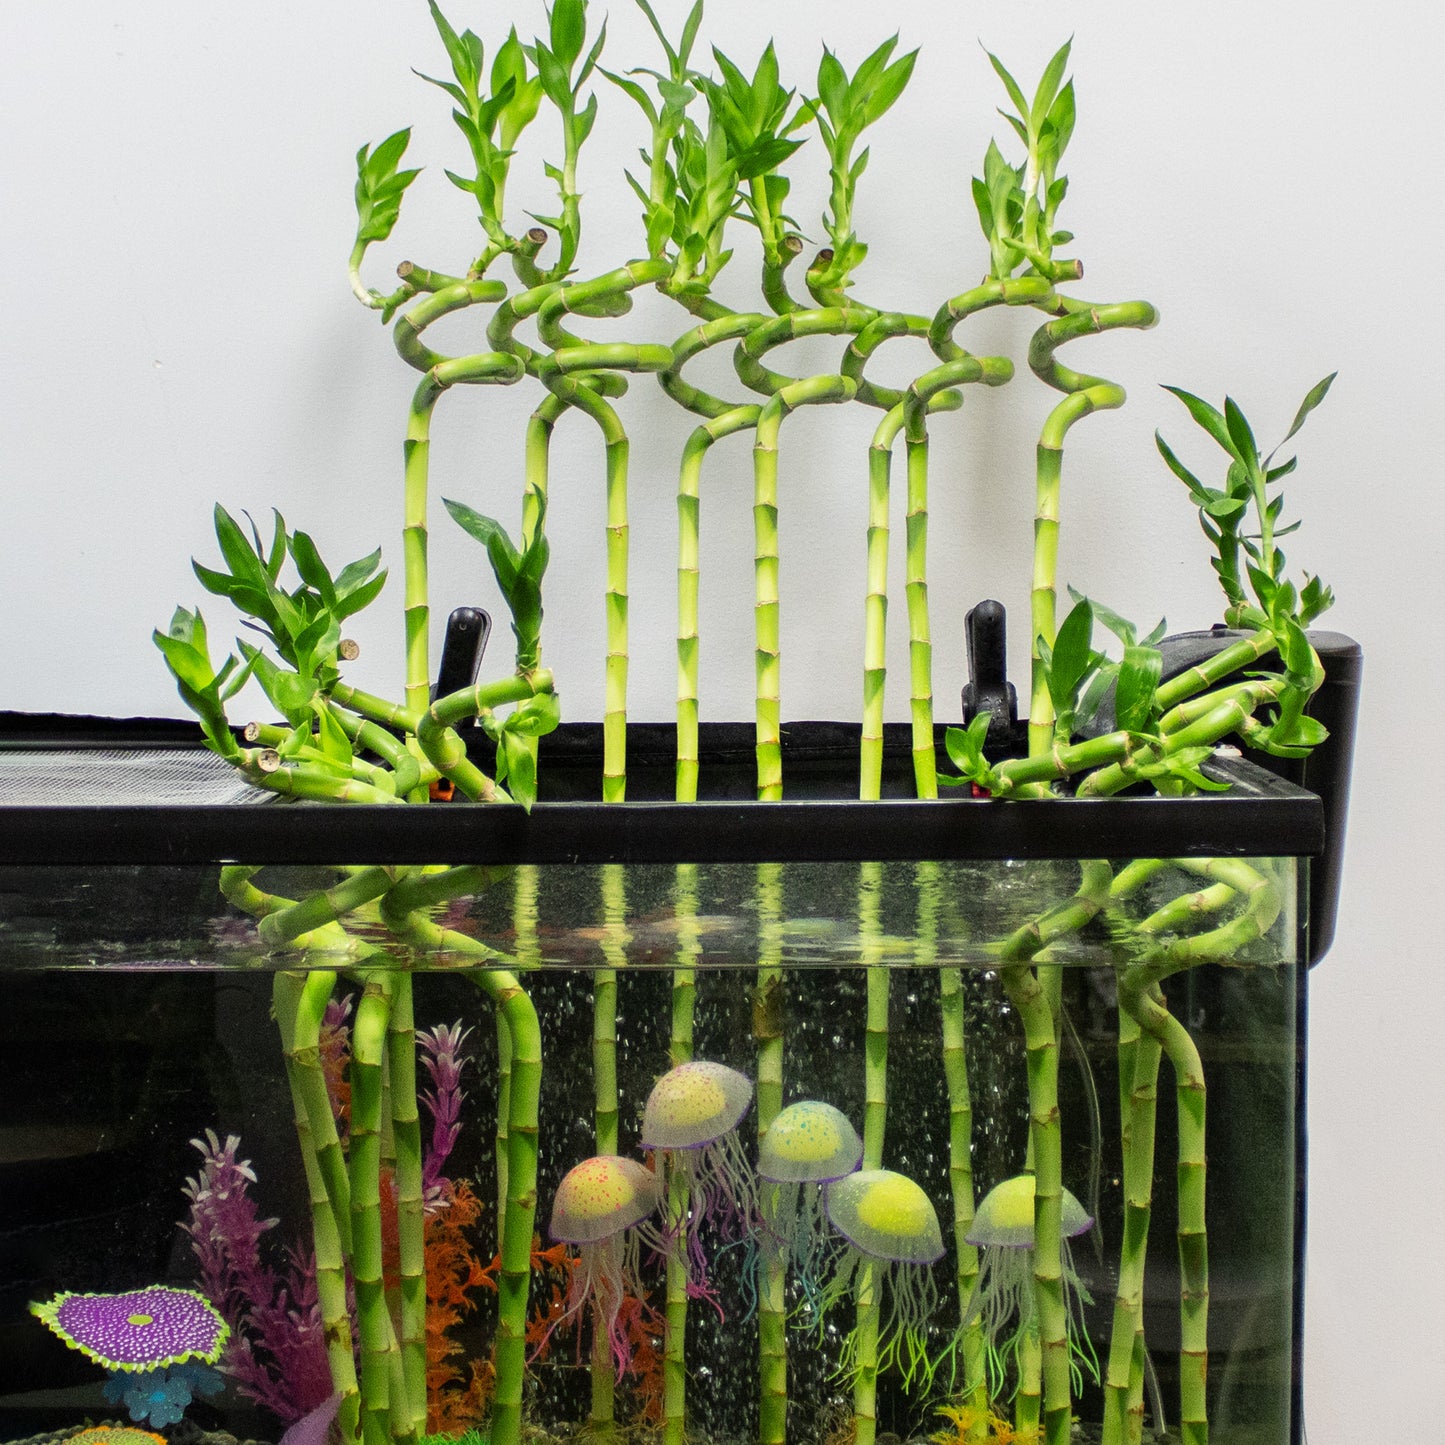 Bundles of spiral lucky bamboo stalks on a fish tank with 5 plastic jellyfish and plastic plants